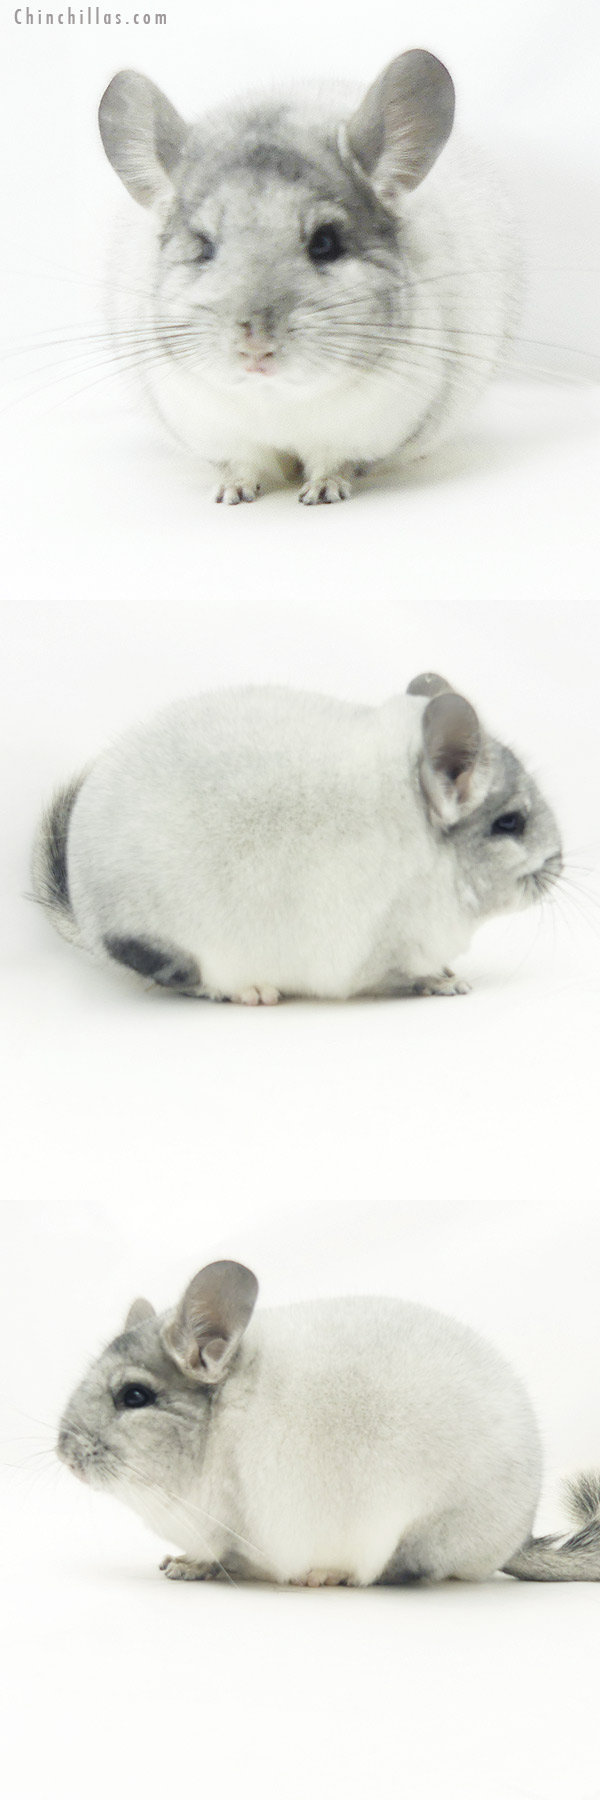 Chinchilla or related item offered for sale or export on Chinchillas.com - 20150 Blocky Premium Production Quality White Mosaic Female Chinchilla